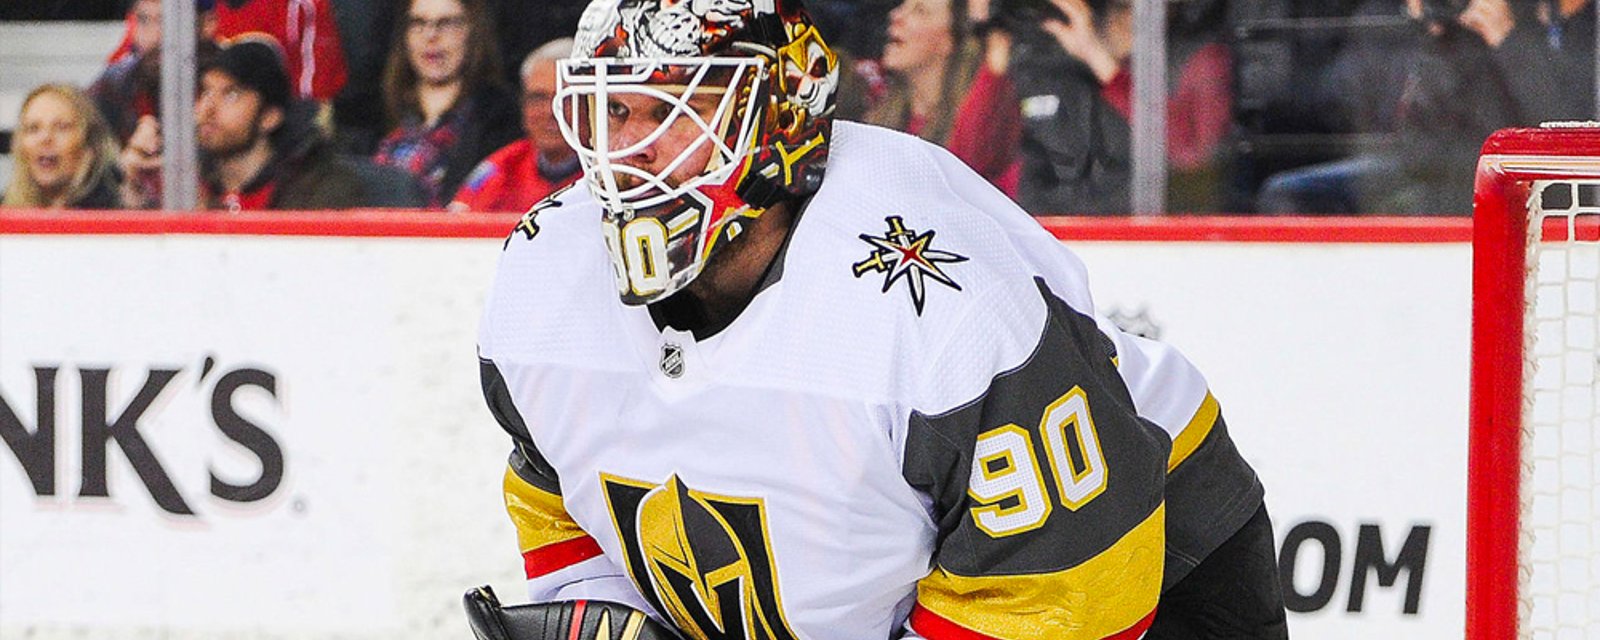 Robin Lehner shuts down online social justice warriors who accused him of being racist